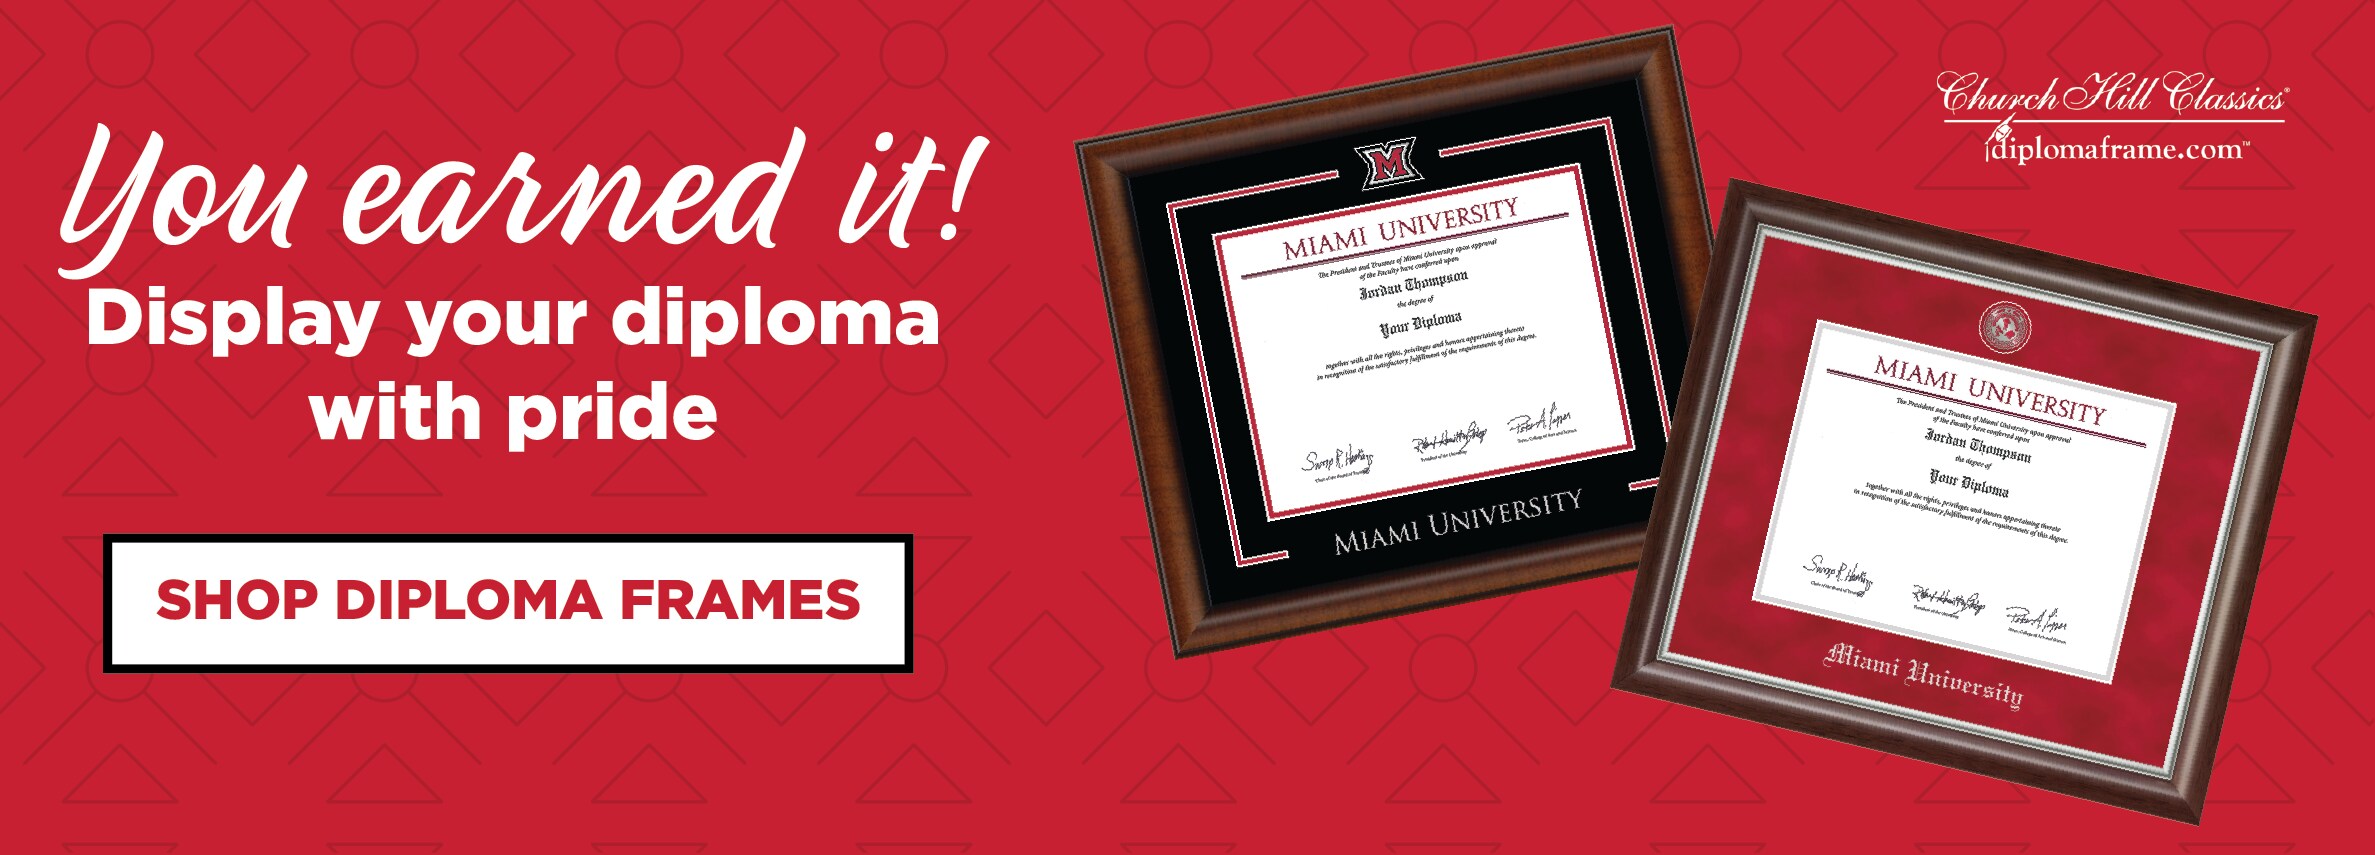 You earned it! Display your diploma with pride SHOP DIPLOMA FRAMES (new tab)